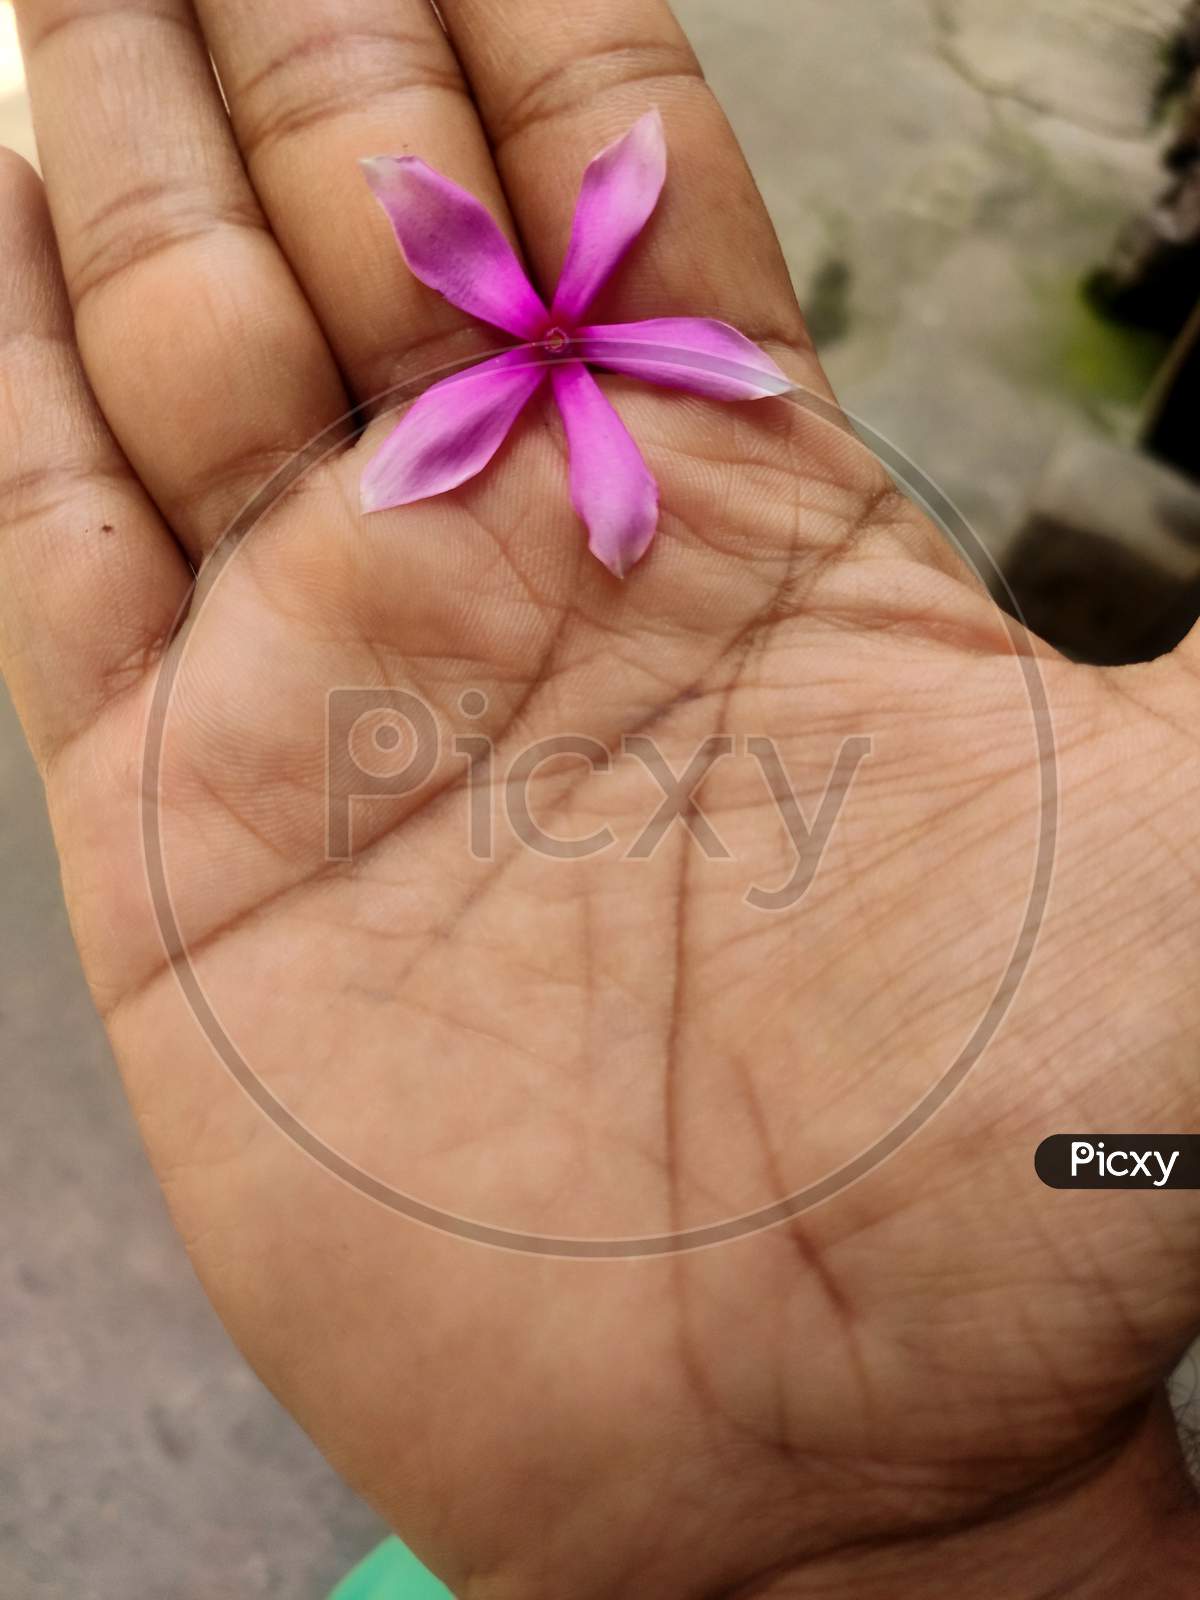 Human Hand With Pink Periwinkle Flower